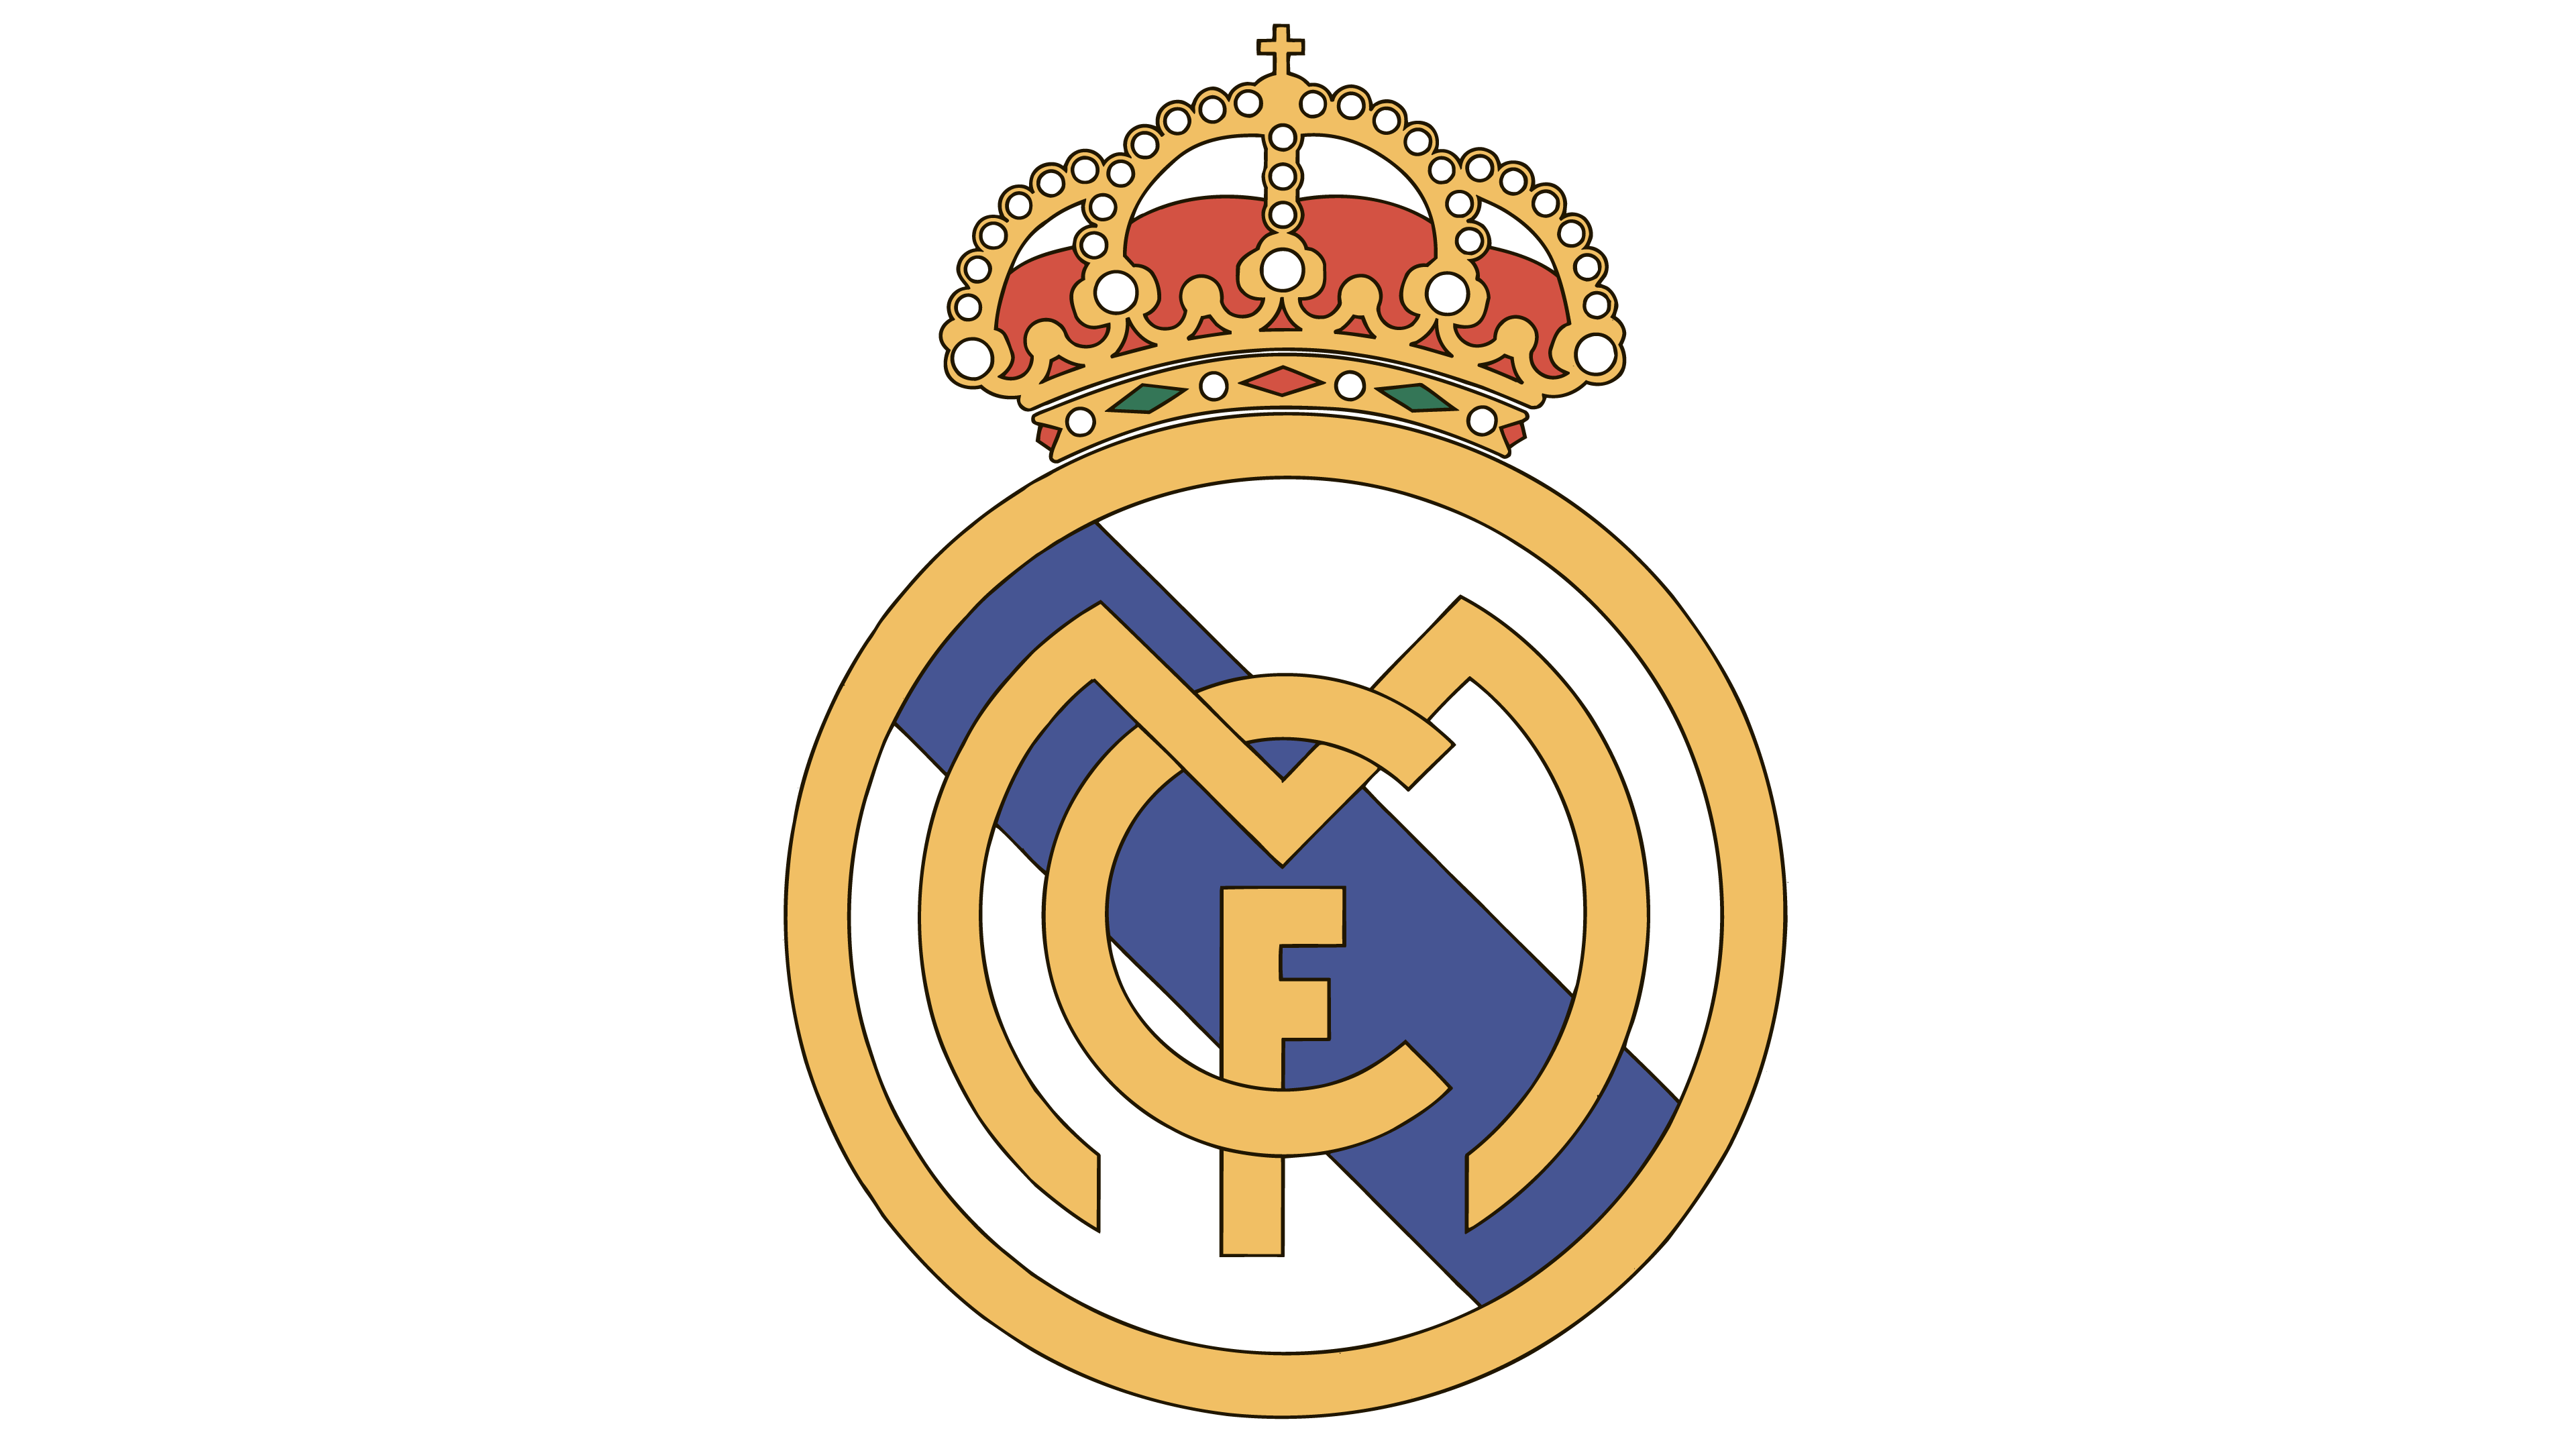 Real Madrid 256x256 Logo Png Images.